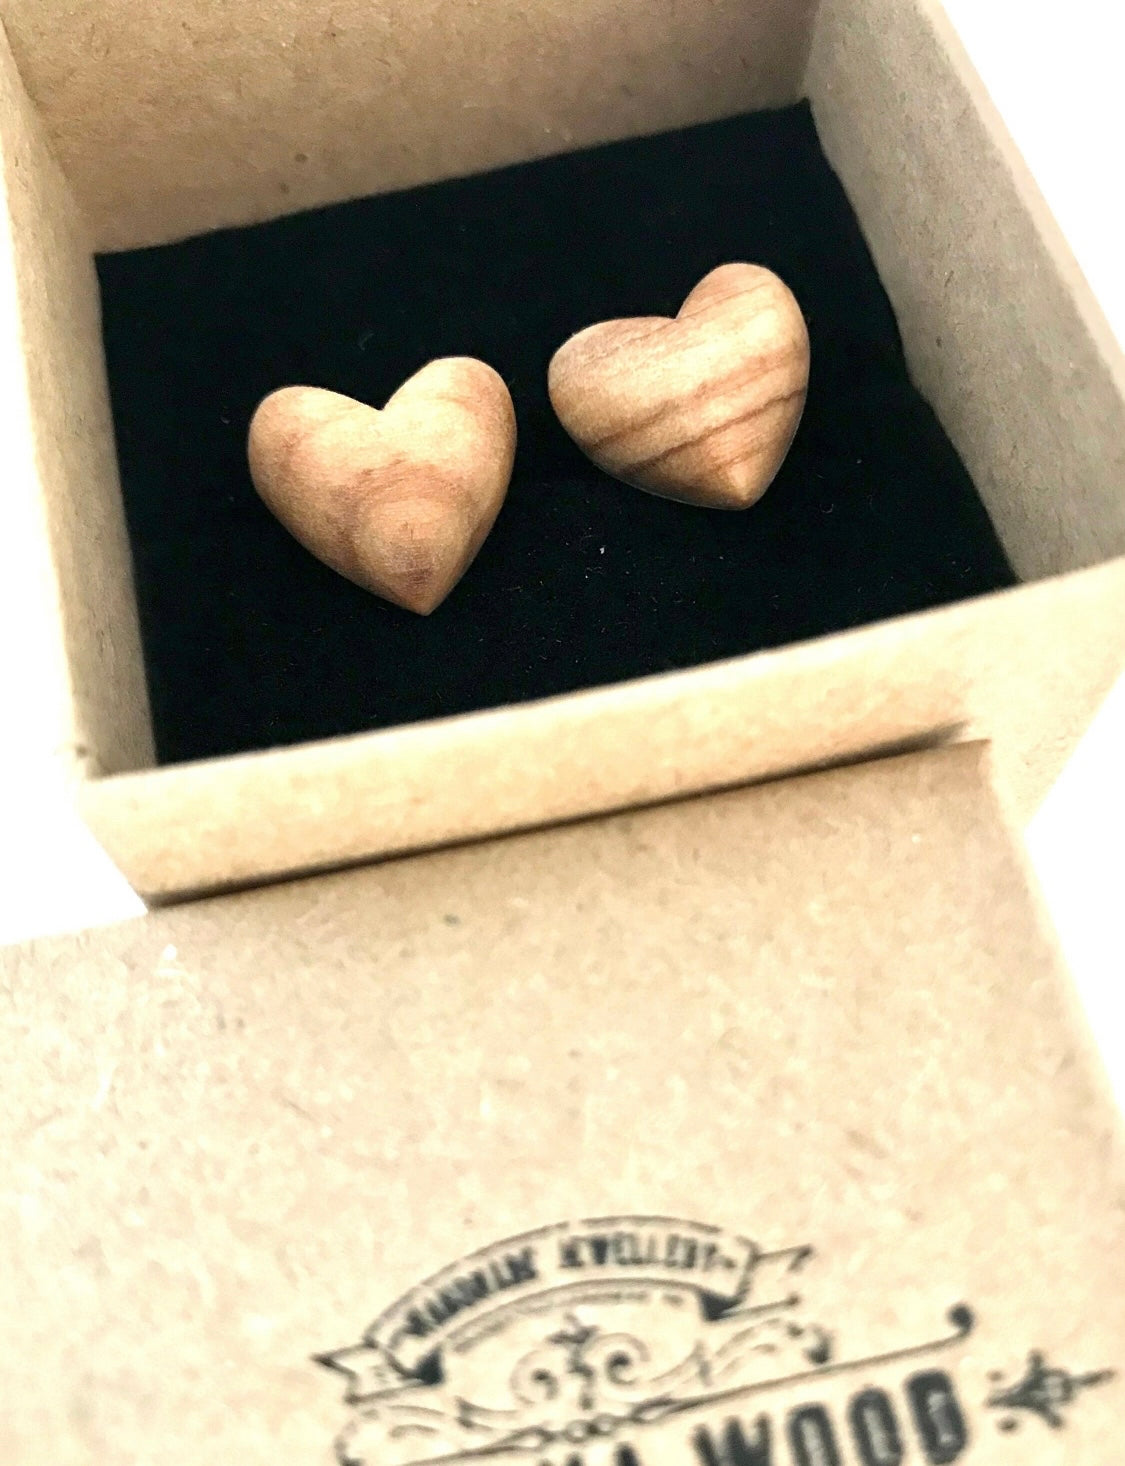 Hand carved heart stud earrings nested in a branded presentation box, ready for gifting.